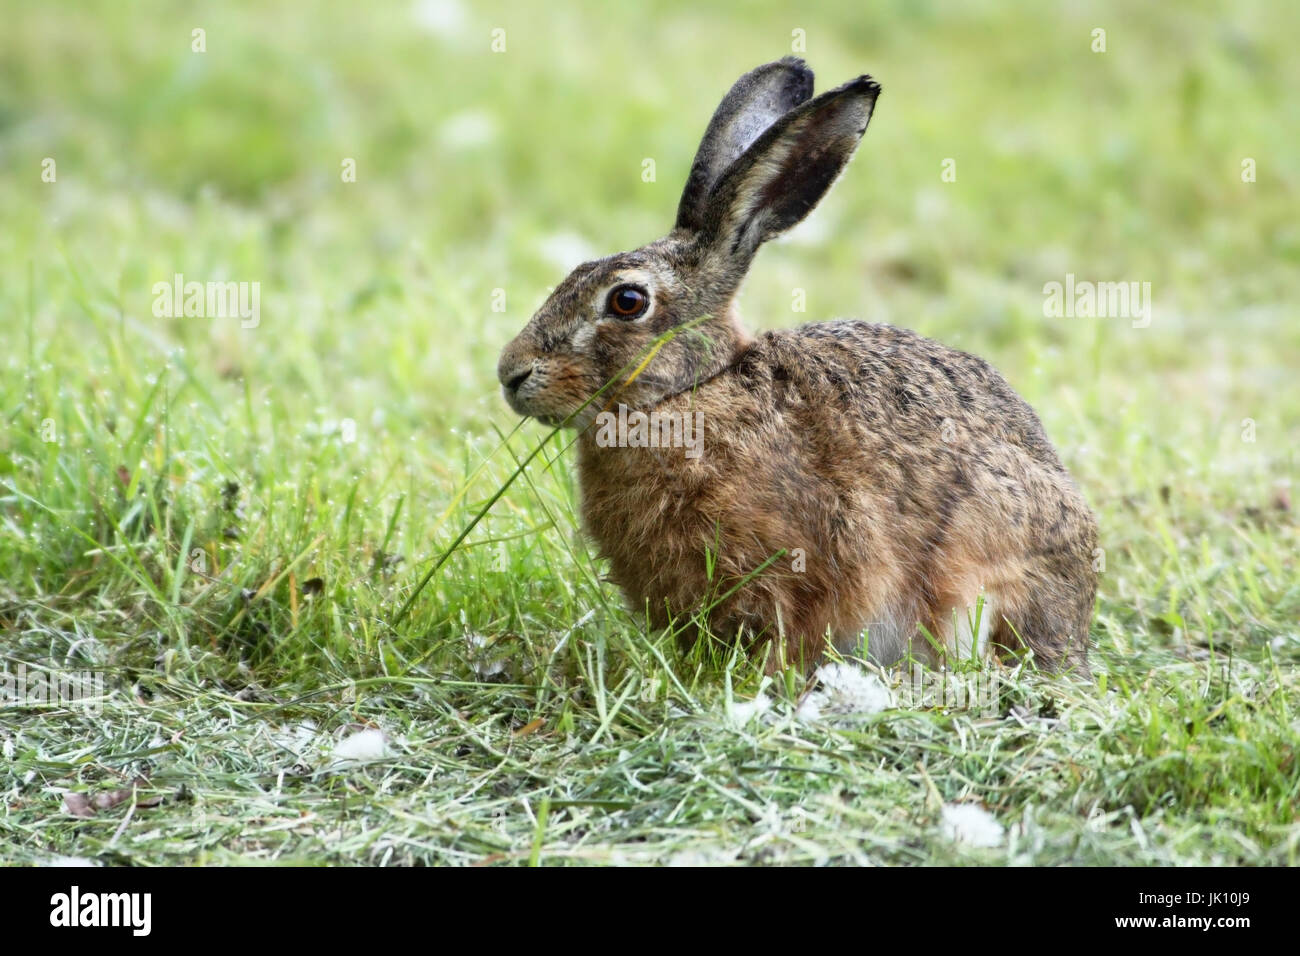 Hare in the field with the feed search, Hase im Feld bei der Futtersuche Stock Photo